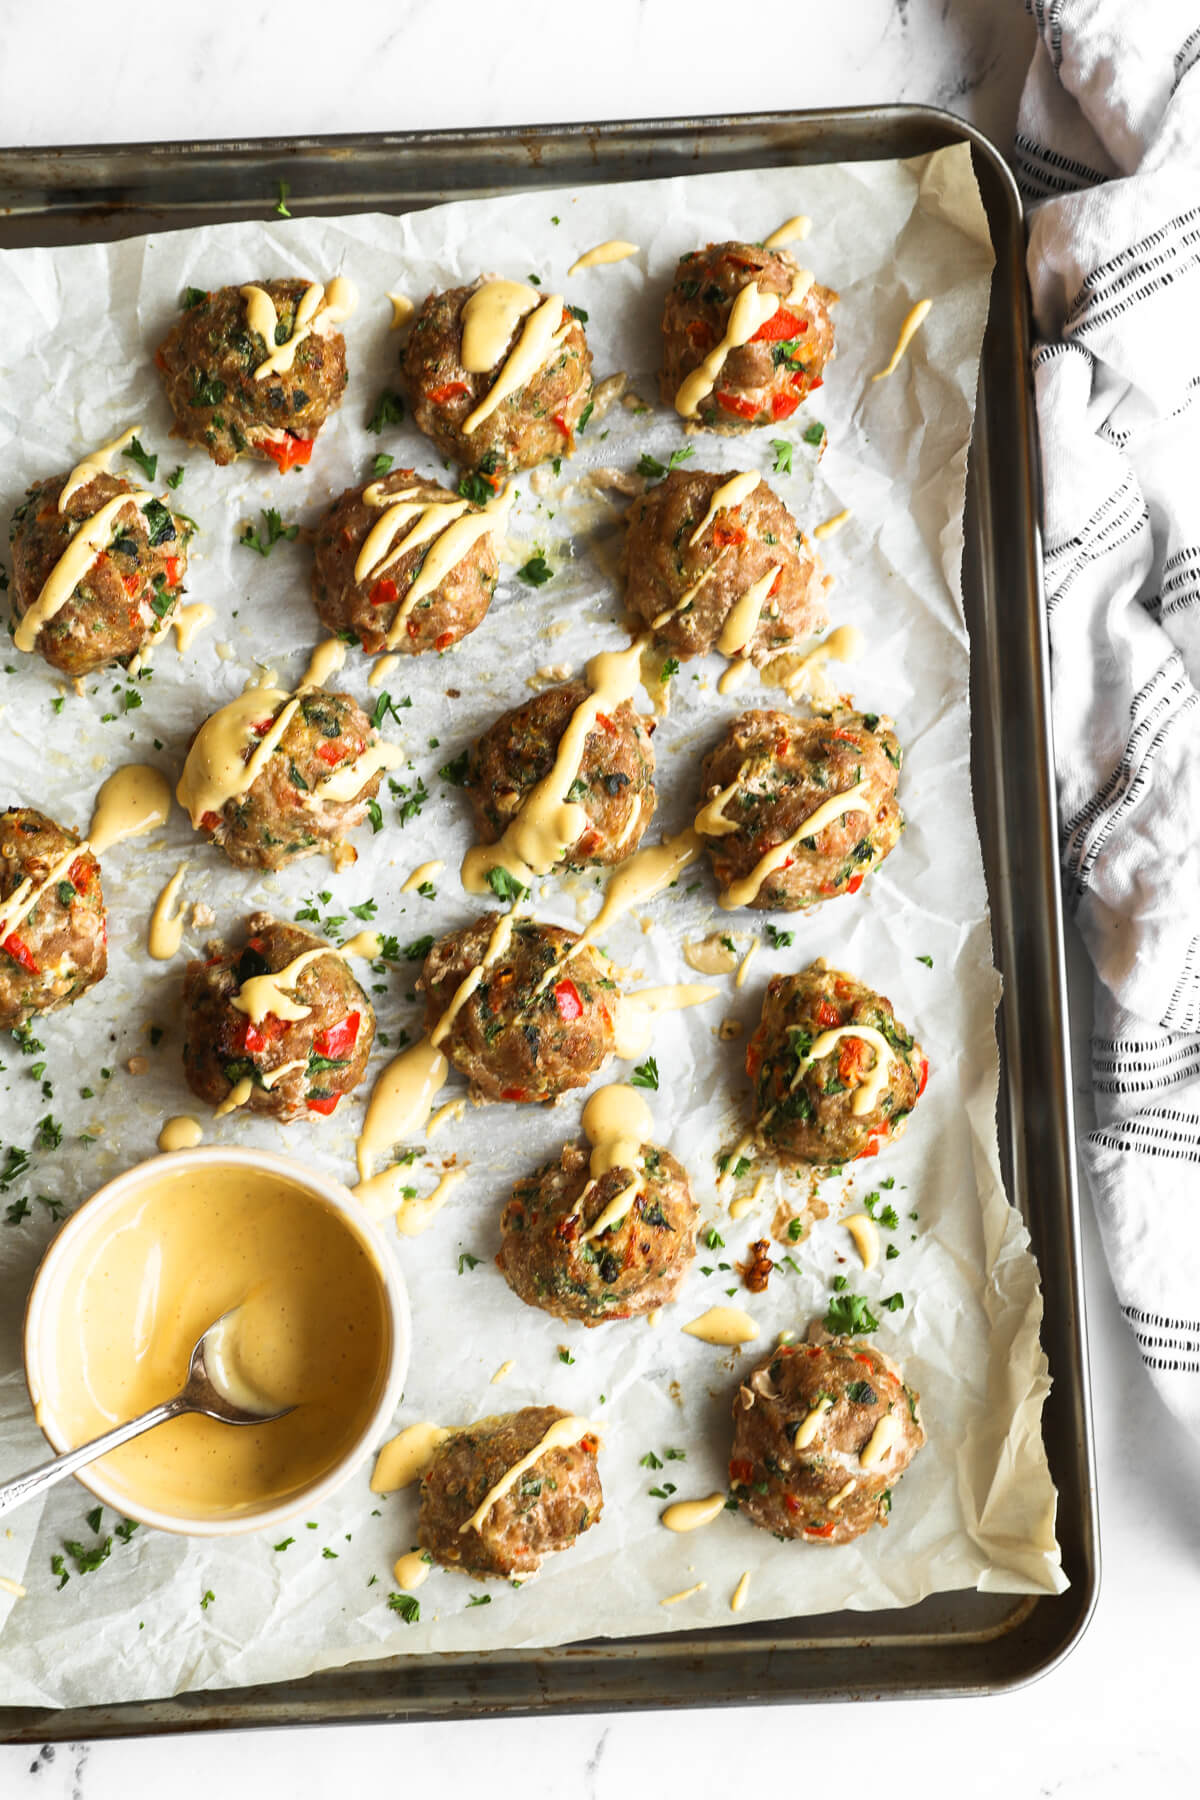 Overhead image of meatballs on a sheet pan with a side of spicy aioli and sauce drizzled on top of meatballs.